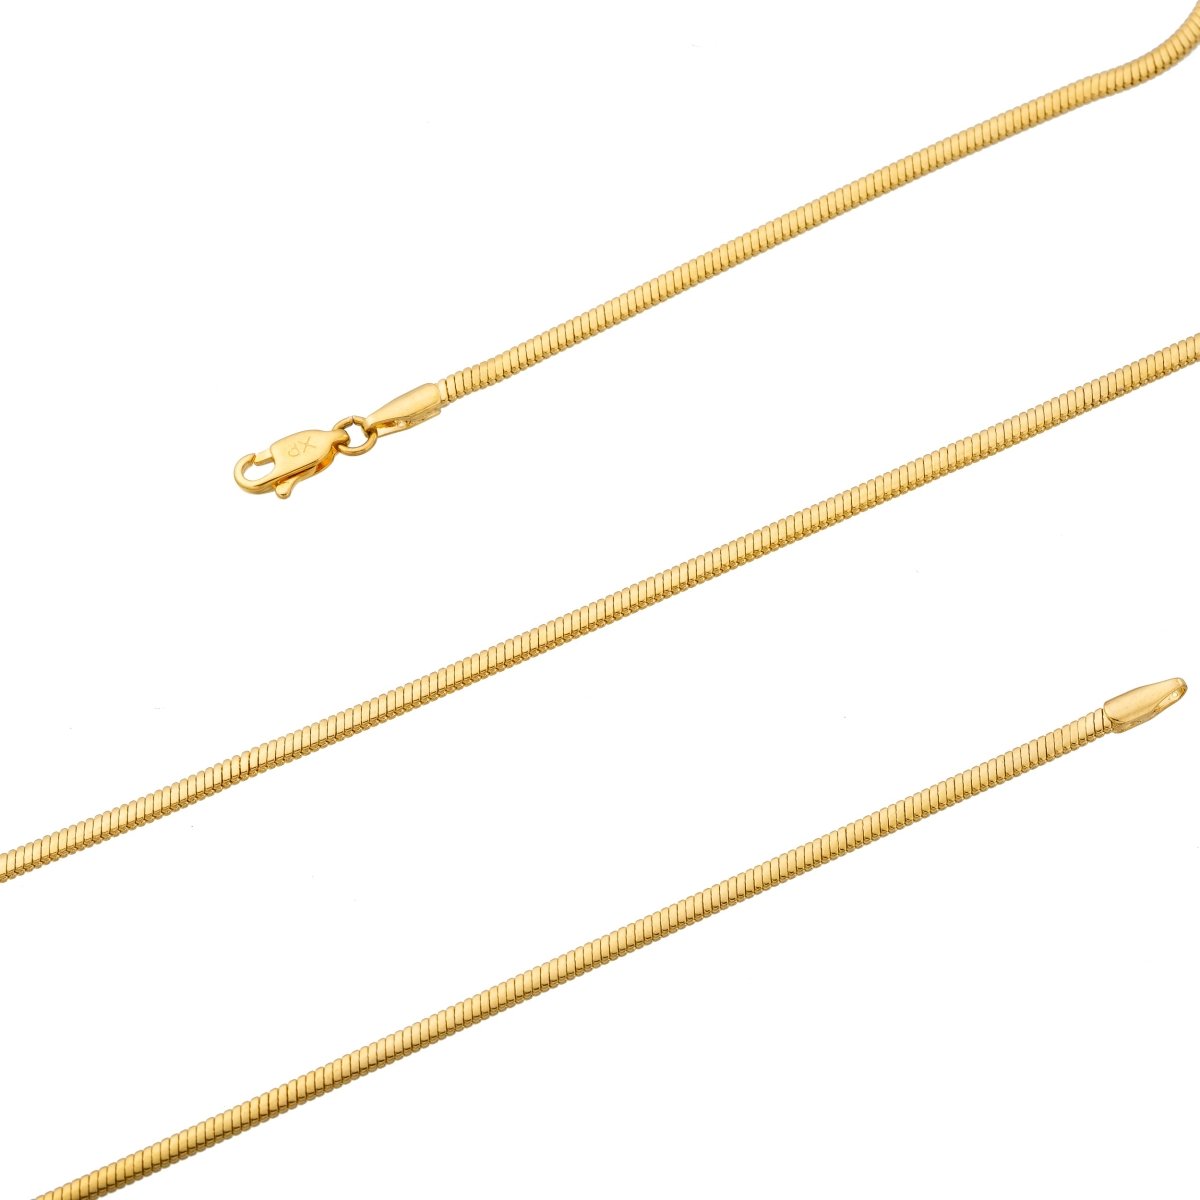 21.6 inches Omega Finished Necklace For Jewelry Making, 24K Gold Plated Chain Necklace, Dainty 2.3mm Omega Necklace w/ Lobster Clasps | CN-198 Clearance Pricing - DLUXCA